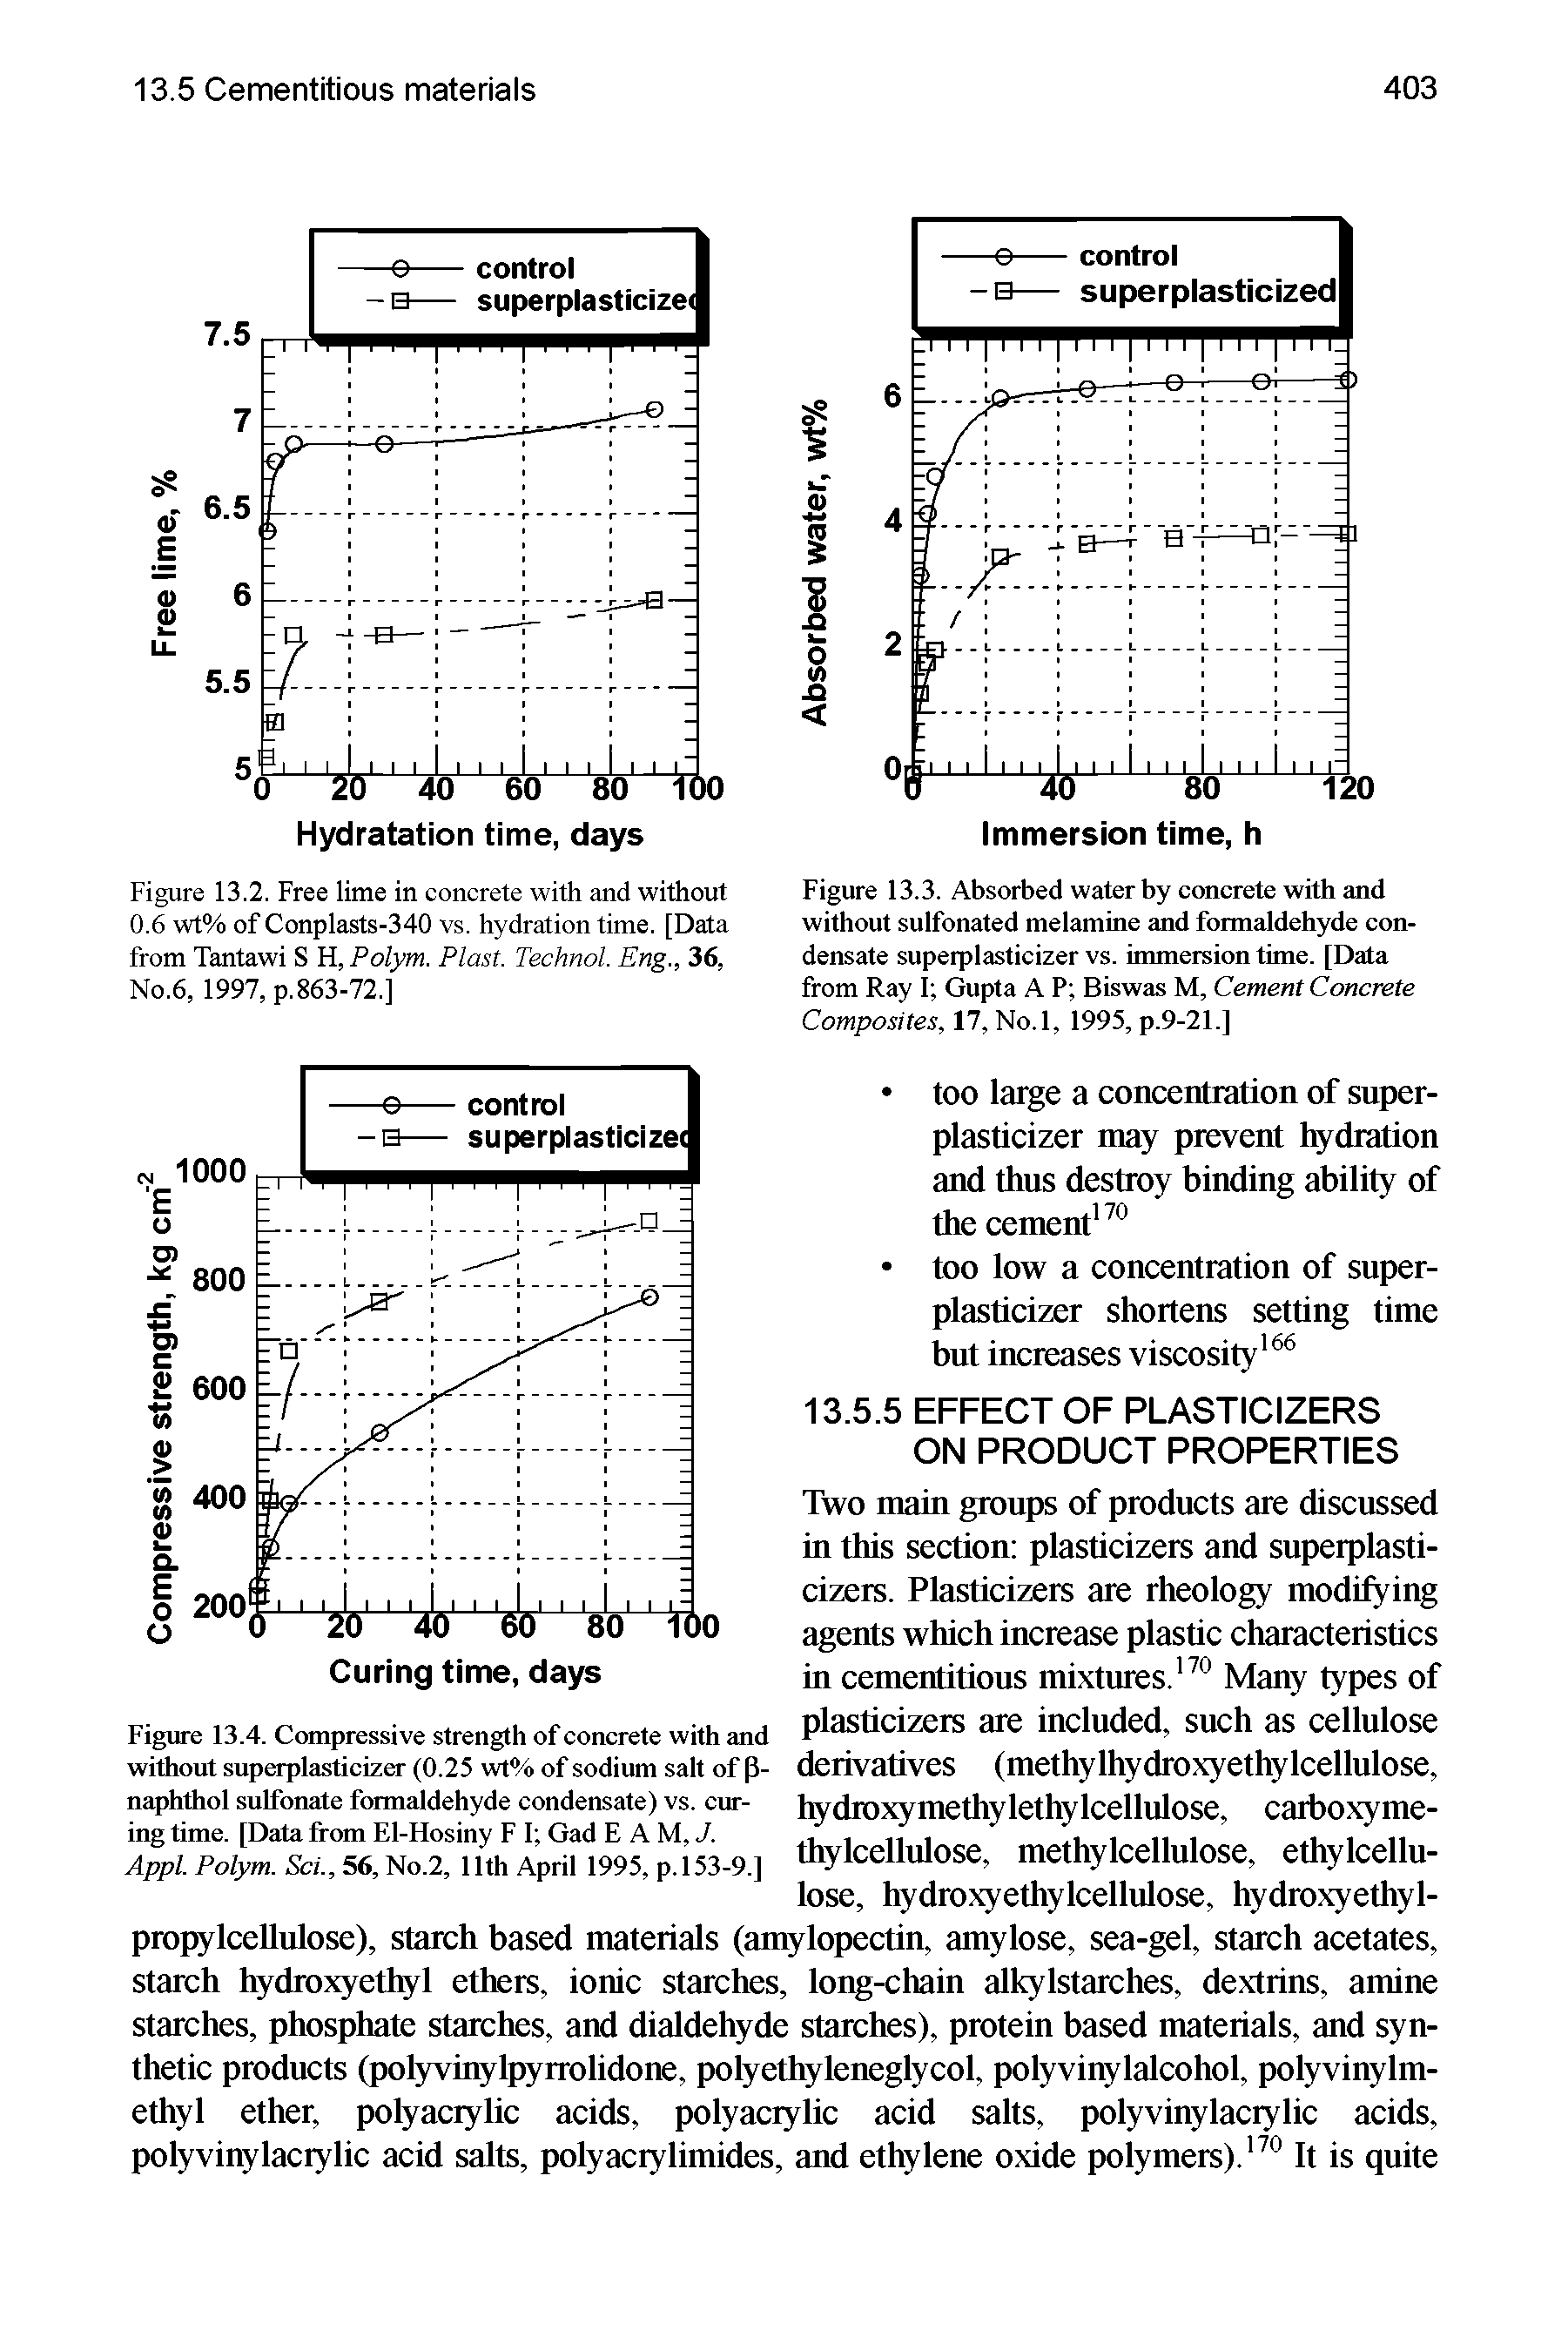 Figure 13.3. Absorbed water by concrete with and without sulfonated melamine and formaldehyde condensate superplasticizer vs. immersion time. [Data from Ray I Gupta A P Biswas M, Cement Concrete Composites, 17, No.l, 1995, p.9-21.]...